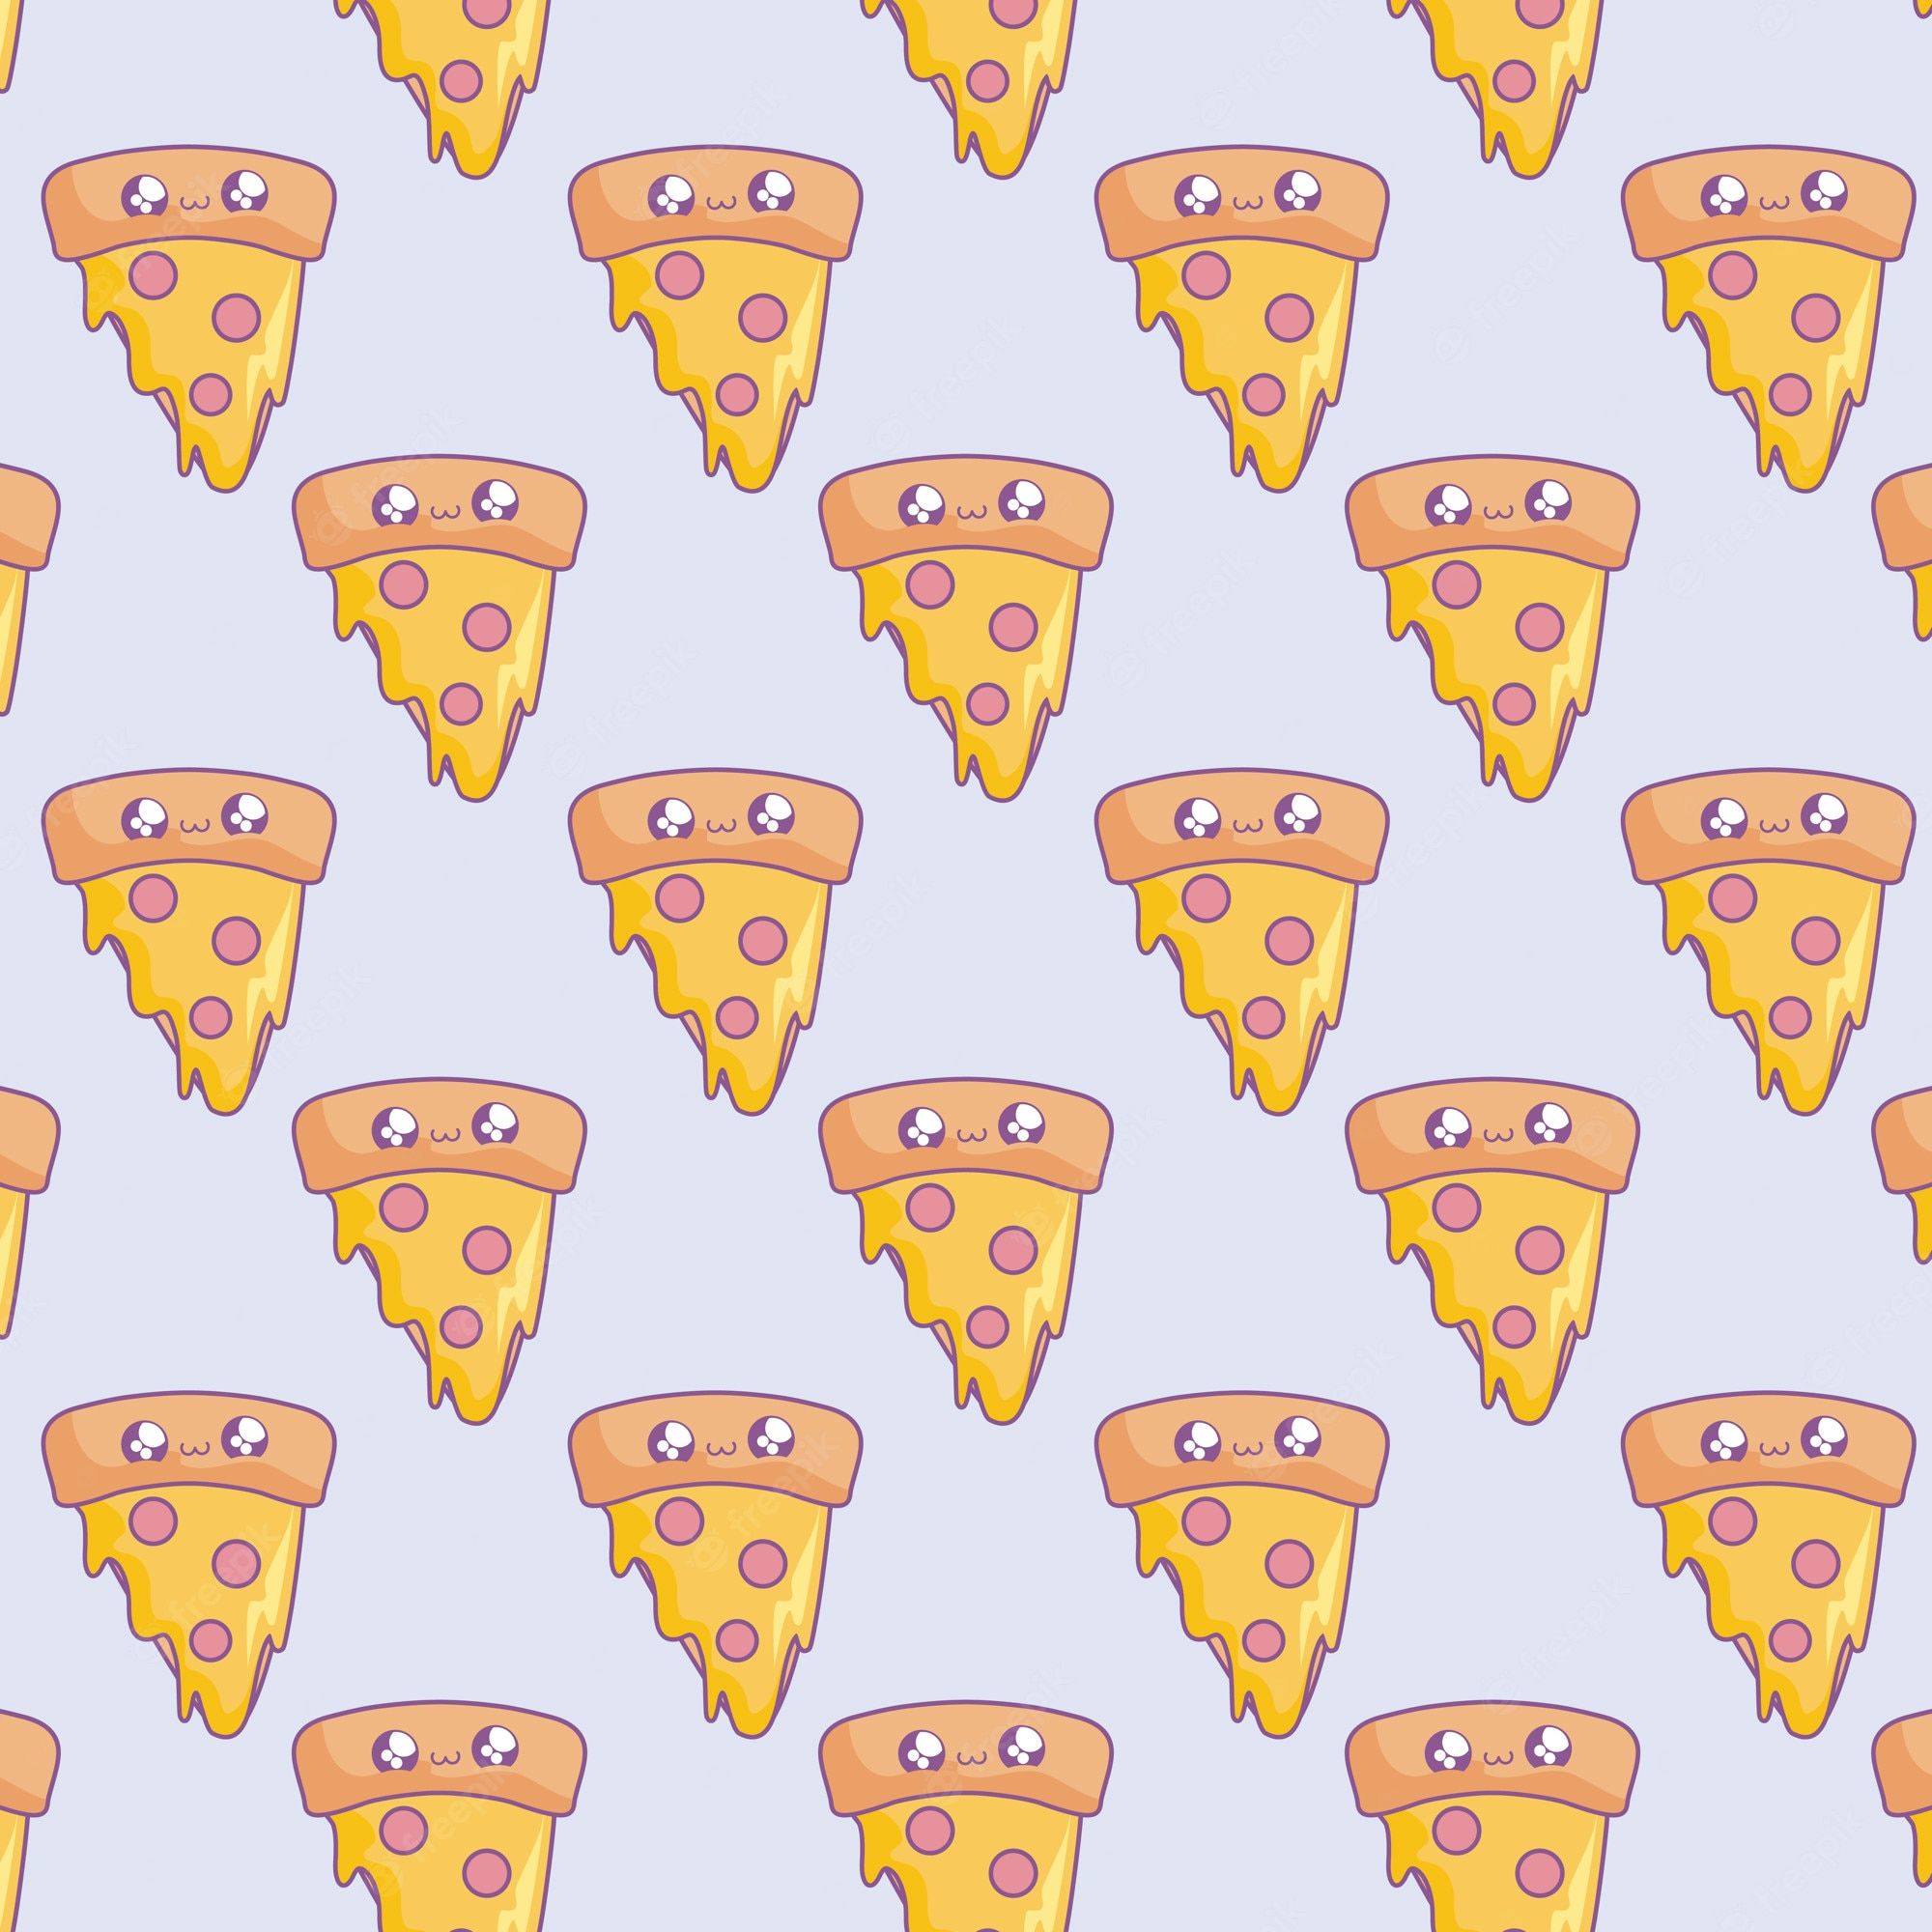 This image is a seamless pattern of pizza slices with cheese and pepperoni, in a kawaii style with eyes and eyelashes. - Pizza